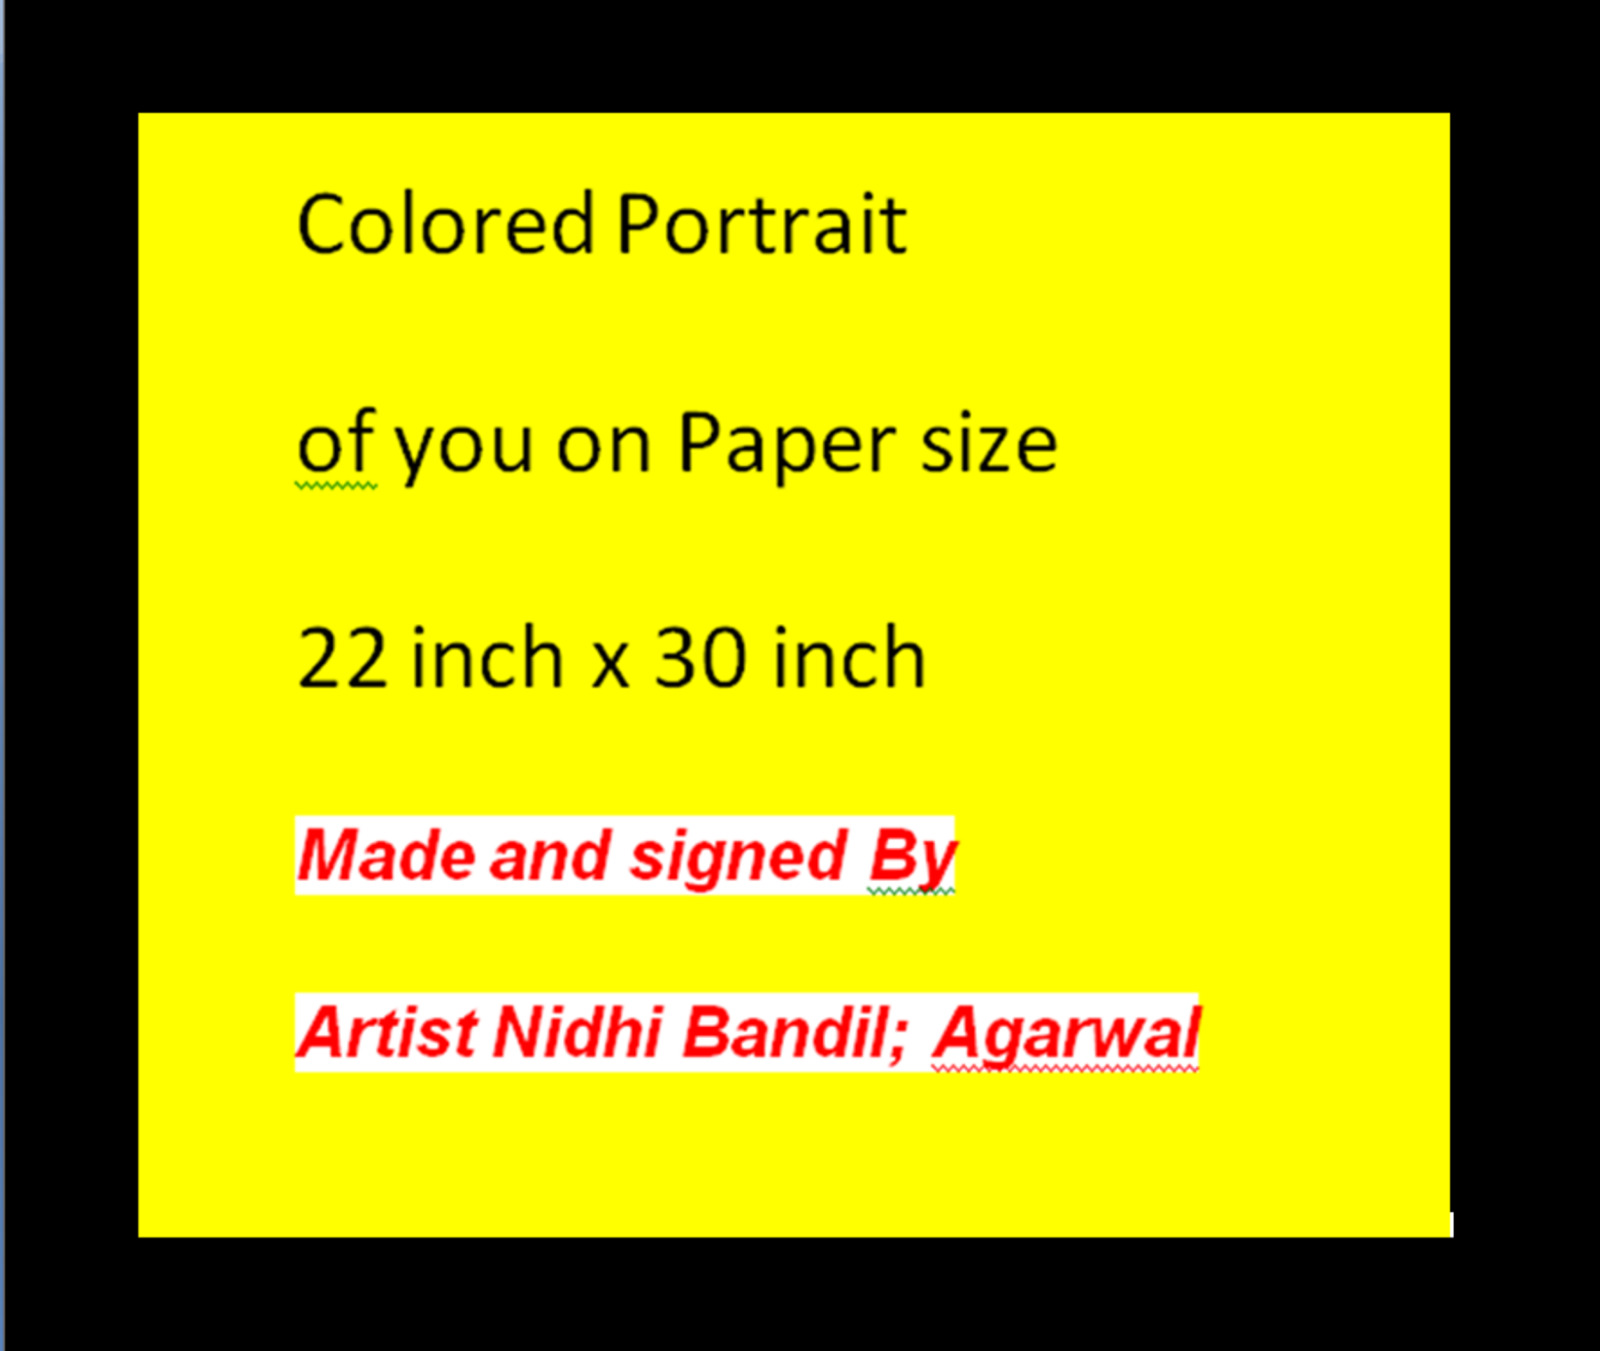 Handmade Portrait Photo Made Signed By World Famous Artist Nidhi Bandil Agarwal